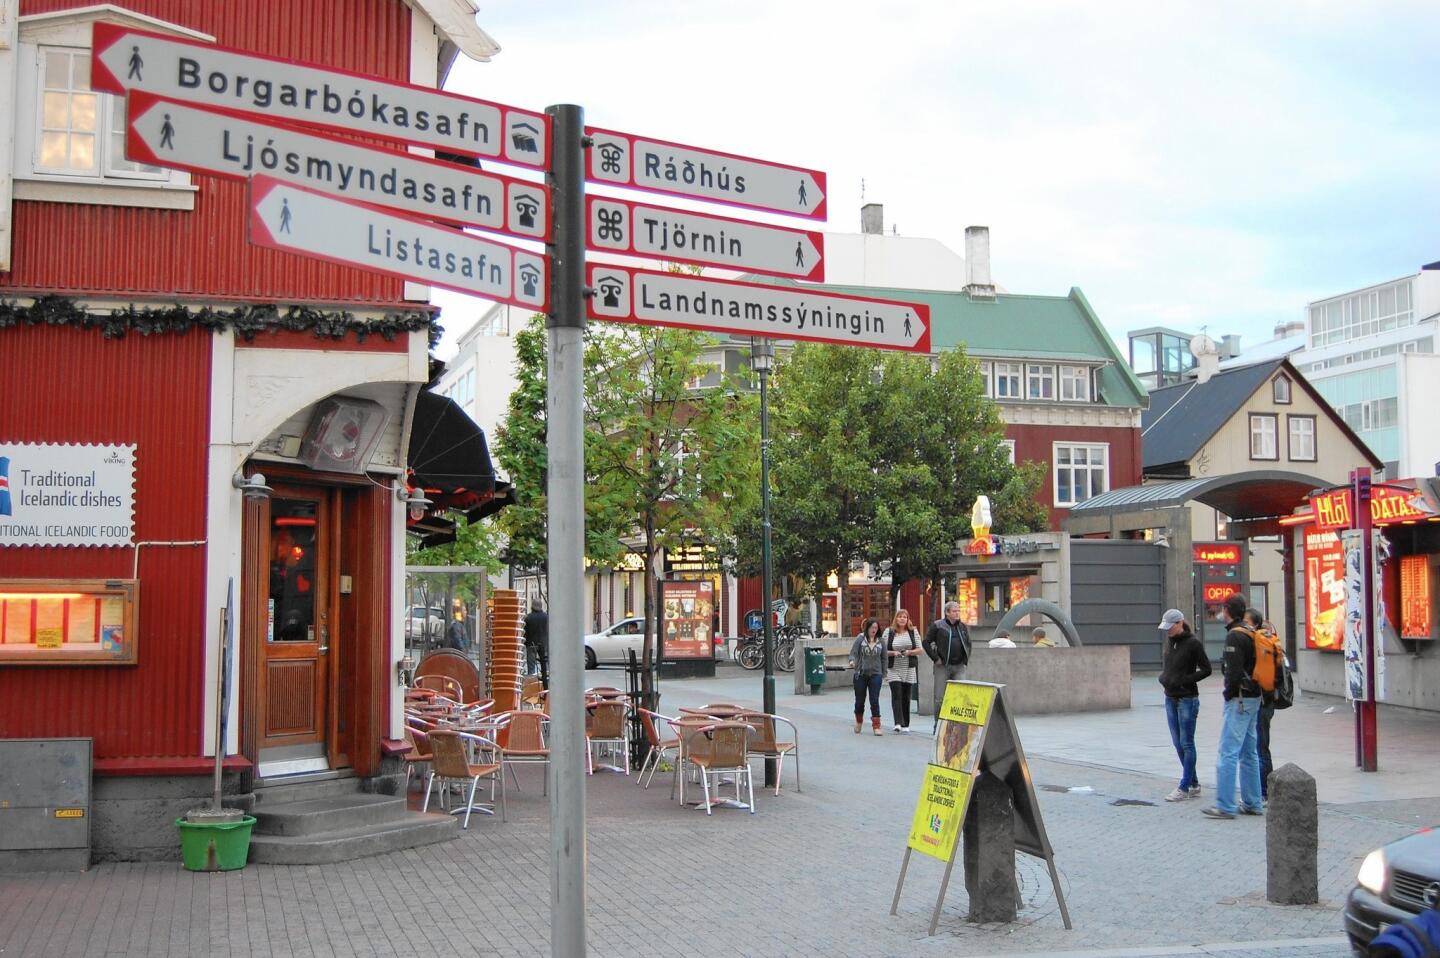 The colorful streets of Reykjavik, Iceland's capital city.